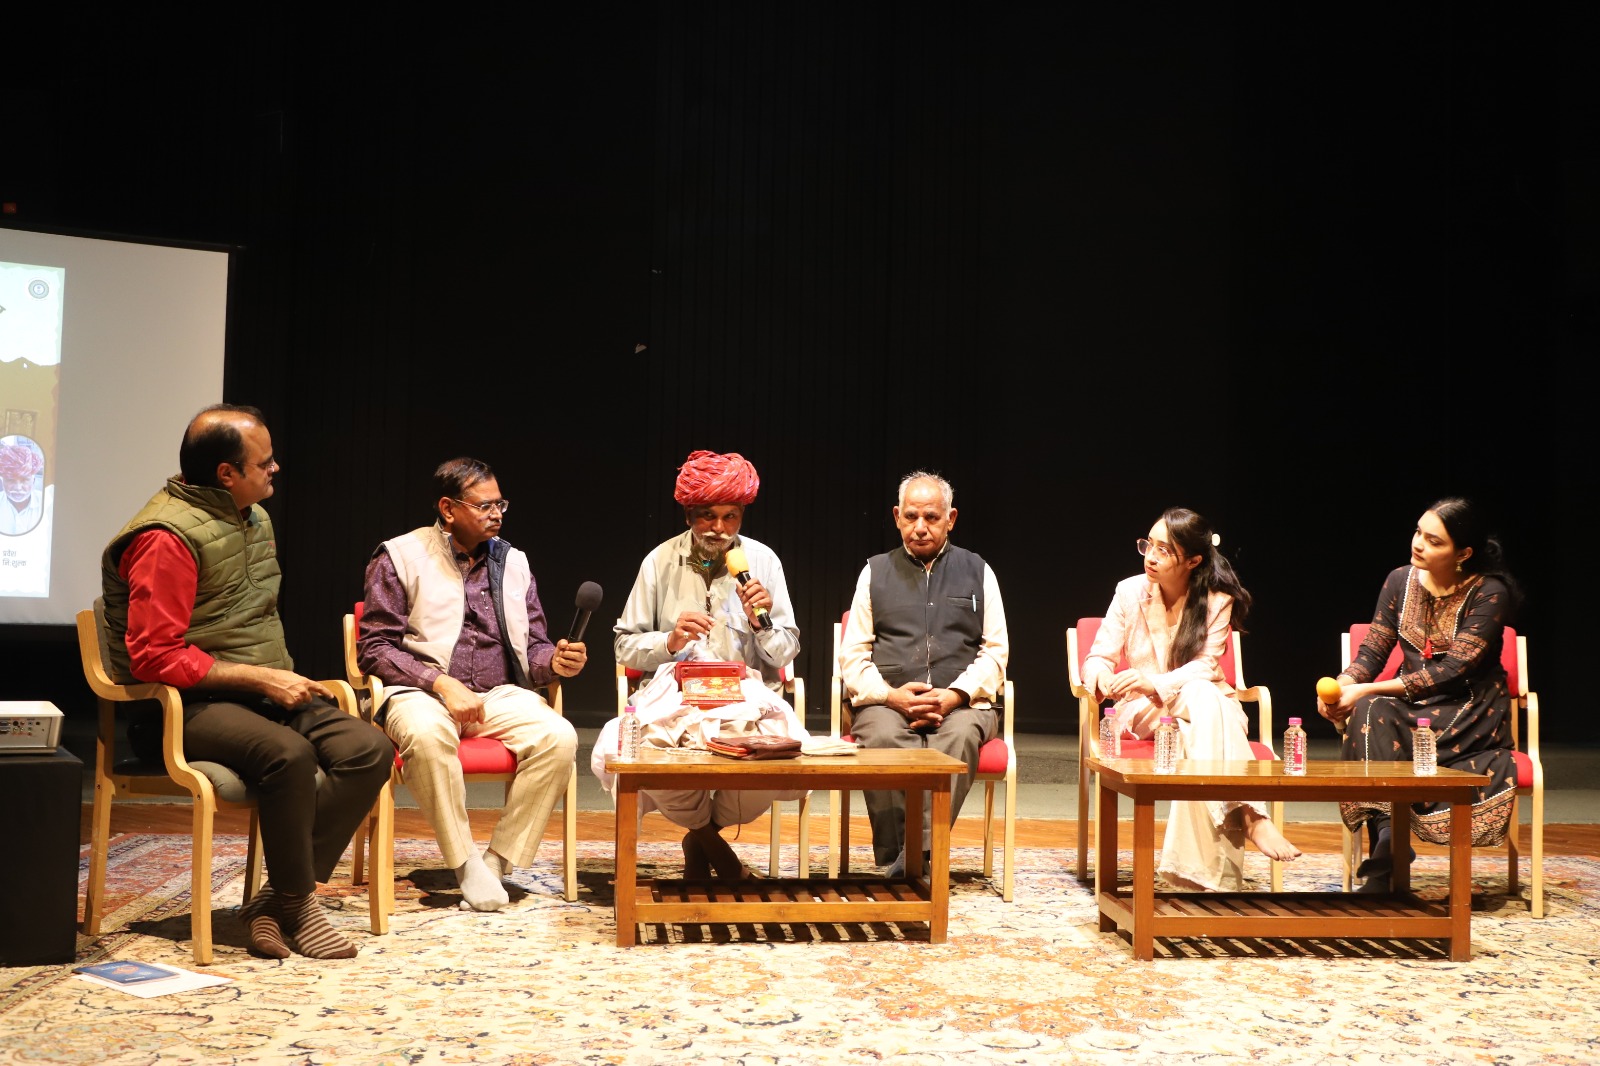 Three-day dialogue flow event for art enthusiasts at JKK concludes